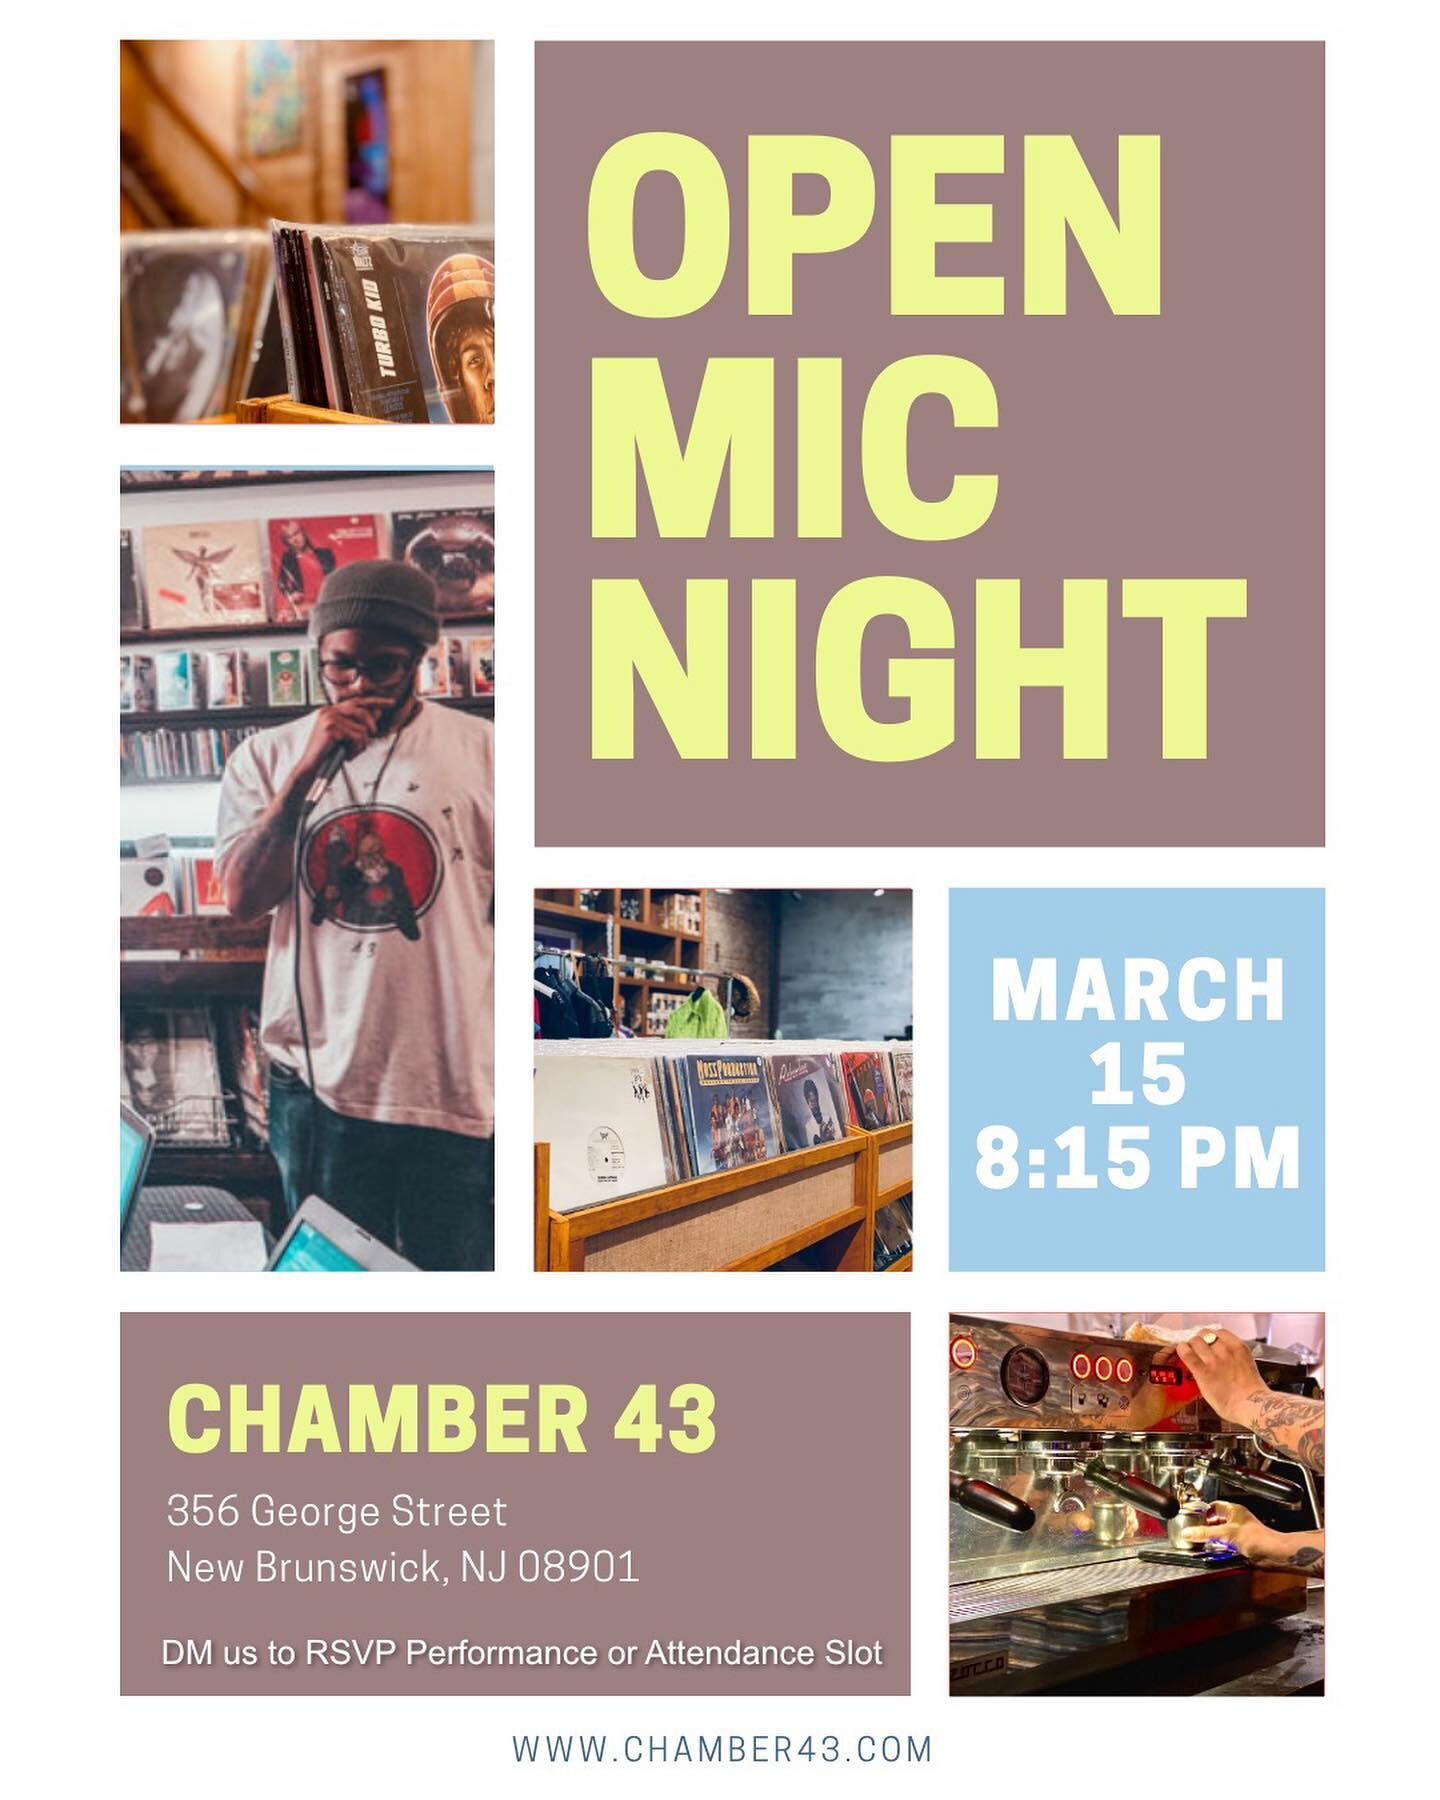 OPEN MIC MONDAYS ARE BACK &amp; NOW IN DOWNTOWN NEW BRUNSWICK!

It&rsquo;s been a long year and we&rsquo;ve missed you all! We&rsquo;re happy to announce that the open mics are back! Music, poetry! 5 min slots! Hosted by the one and only @jaygatsby42